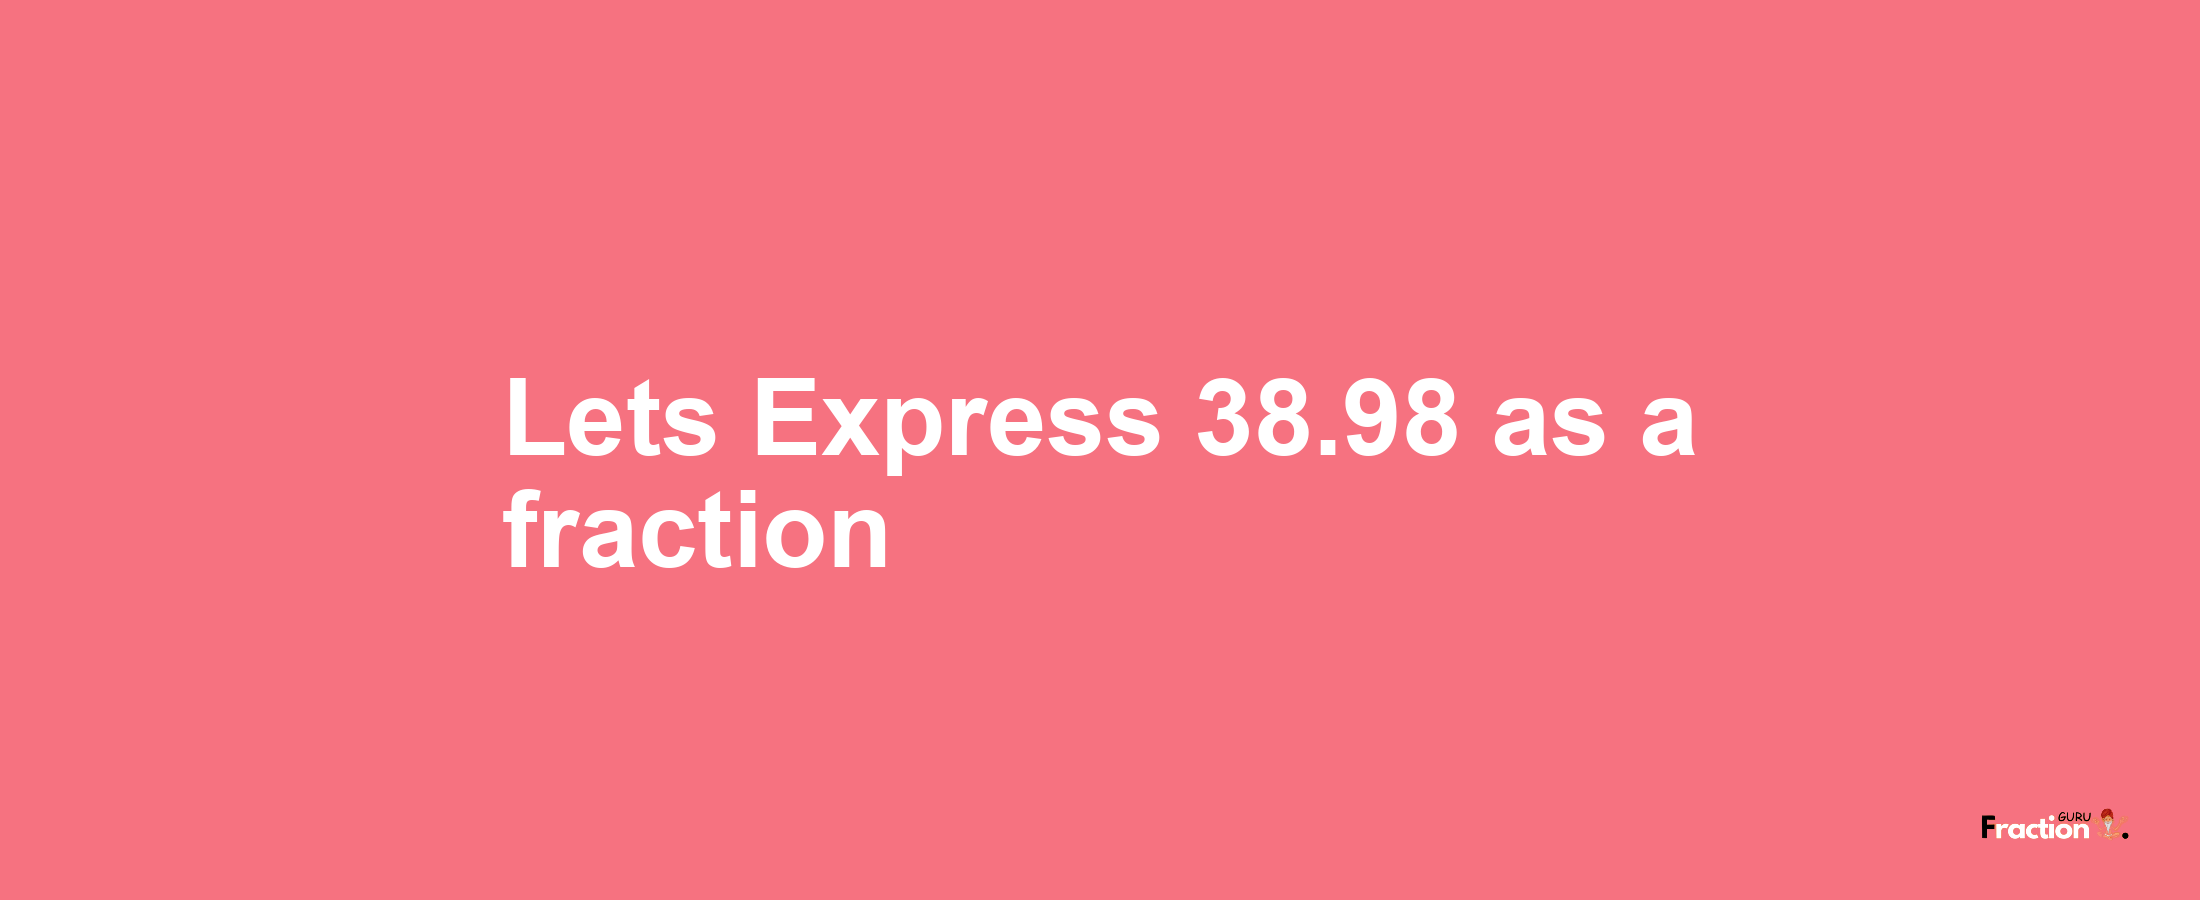 Lets Express 38.98 as afraction